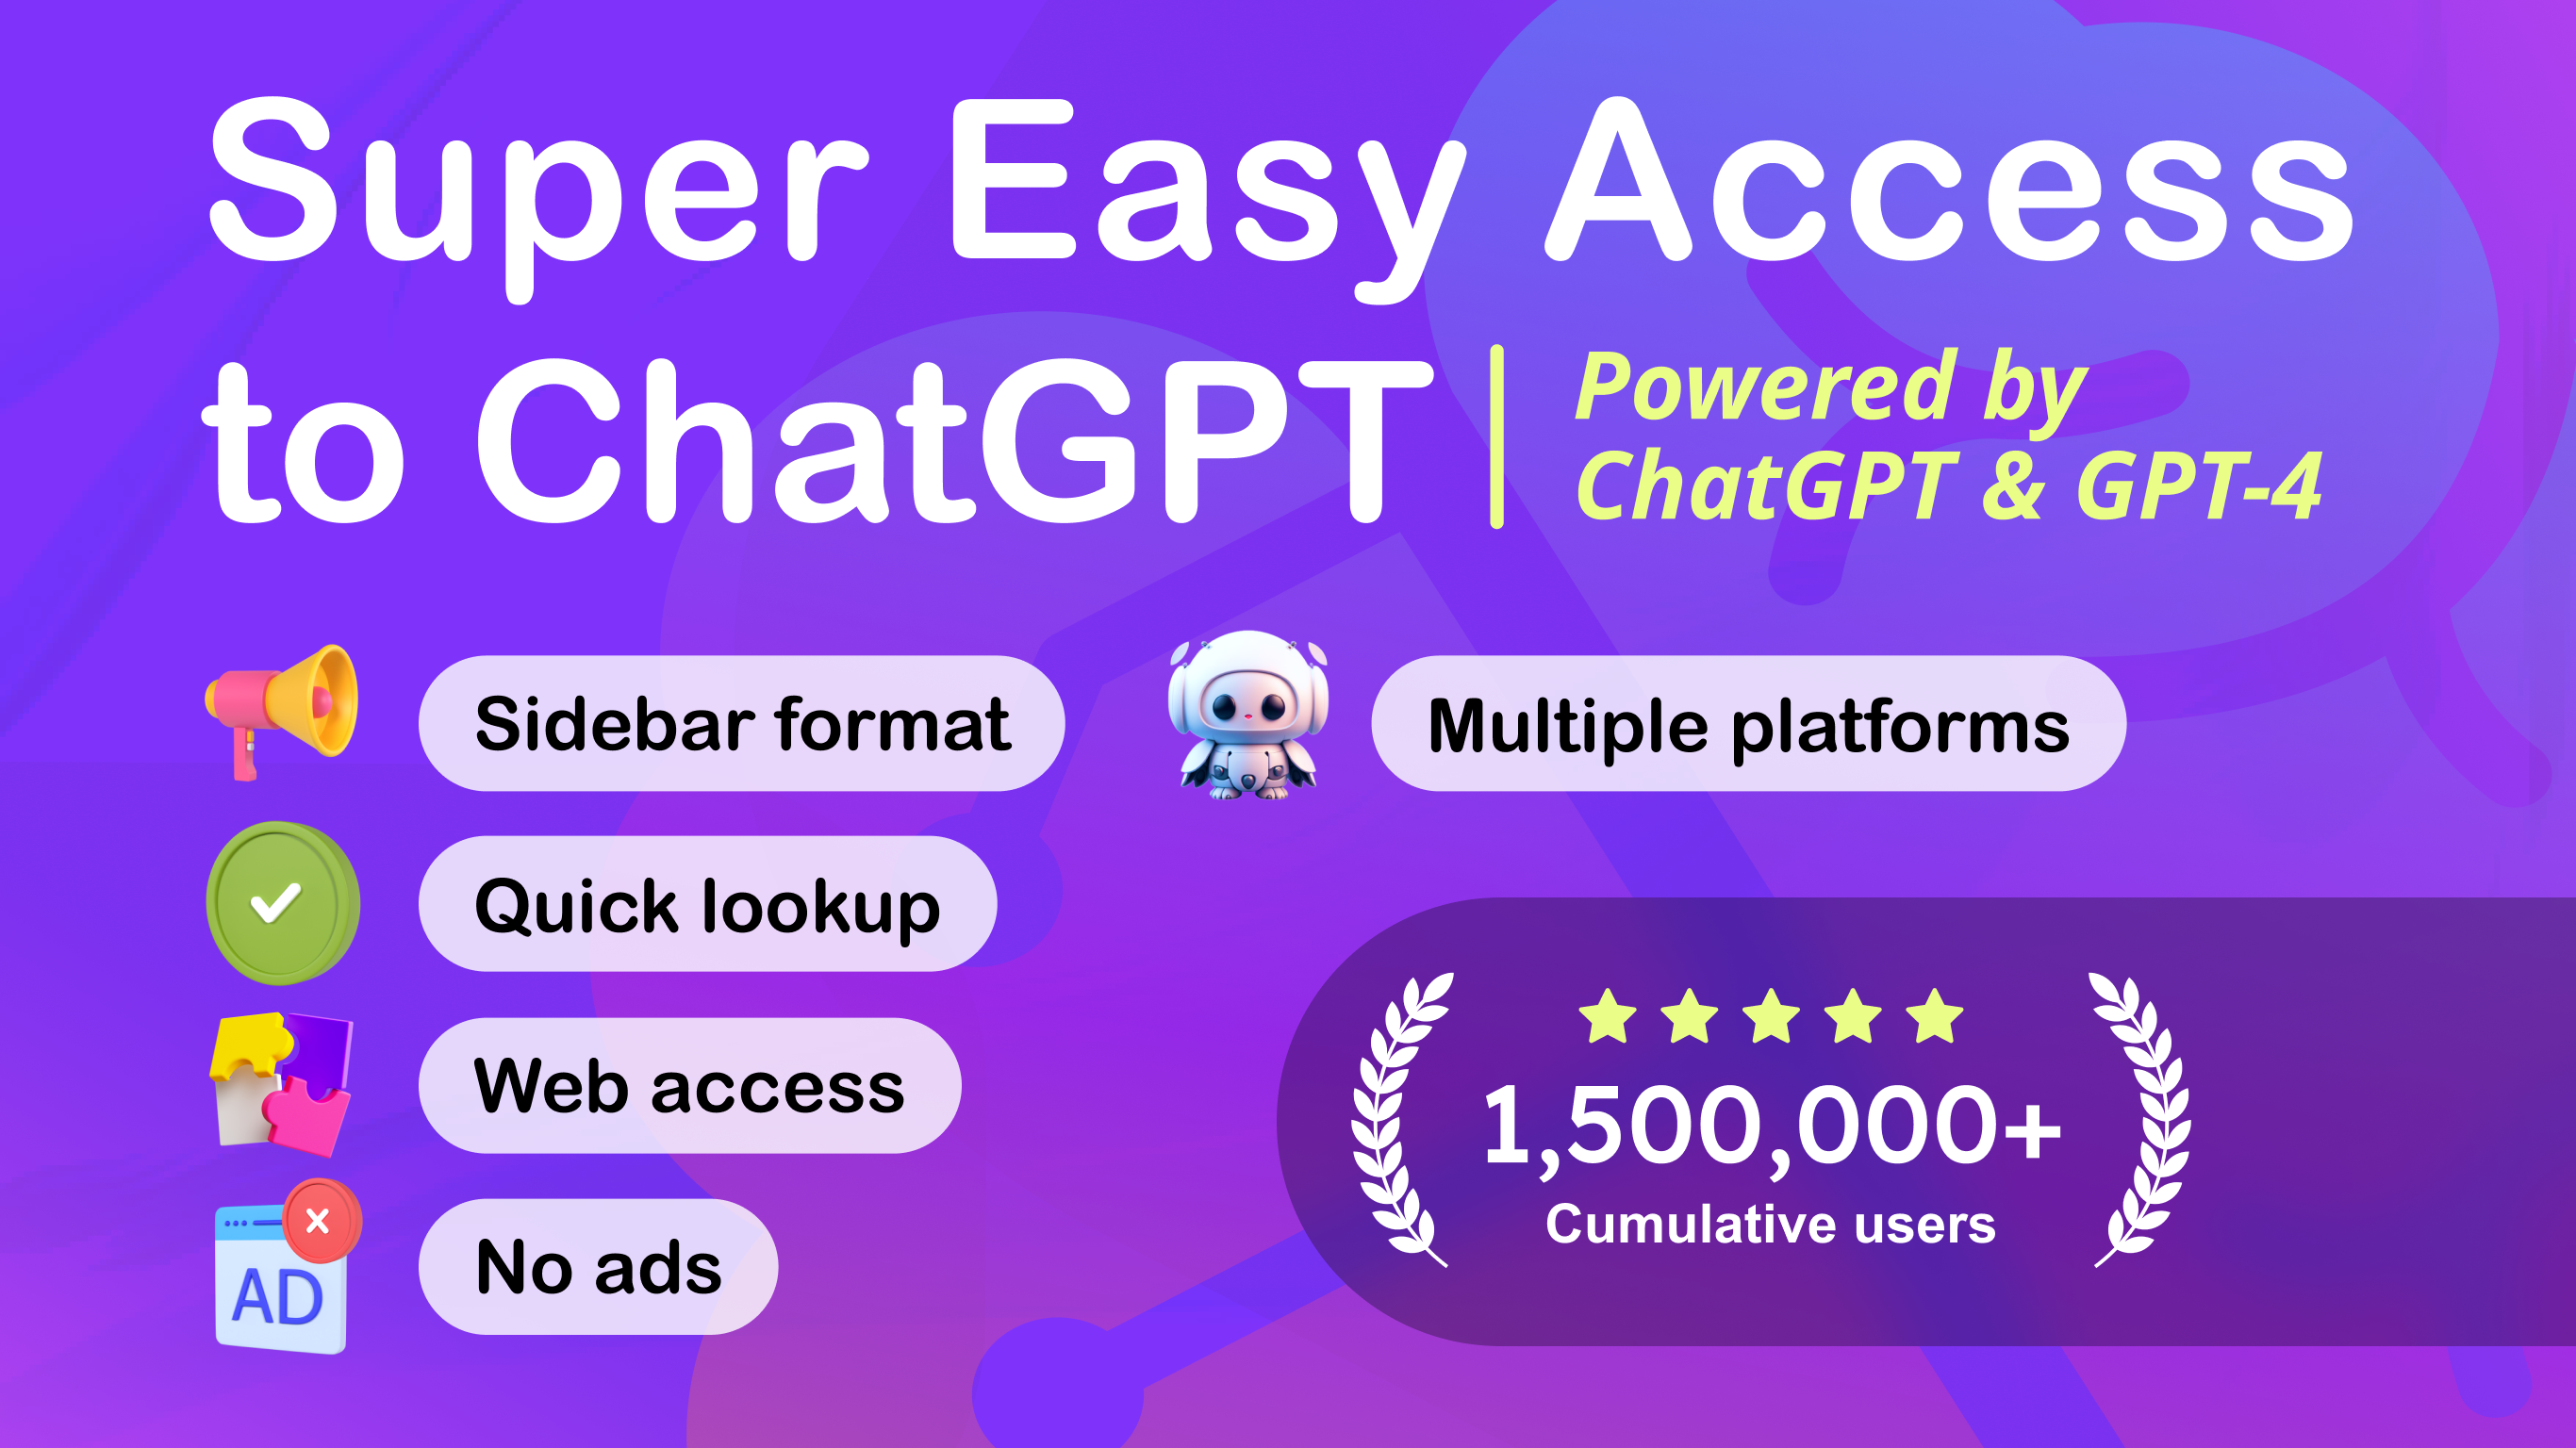 Super easy access to ChatGPT